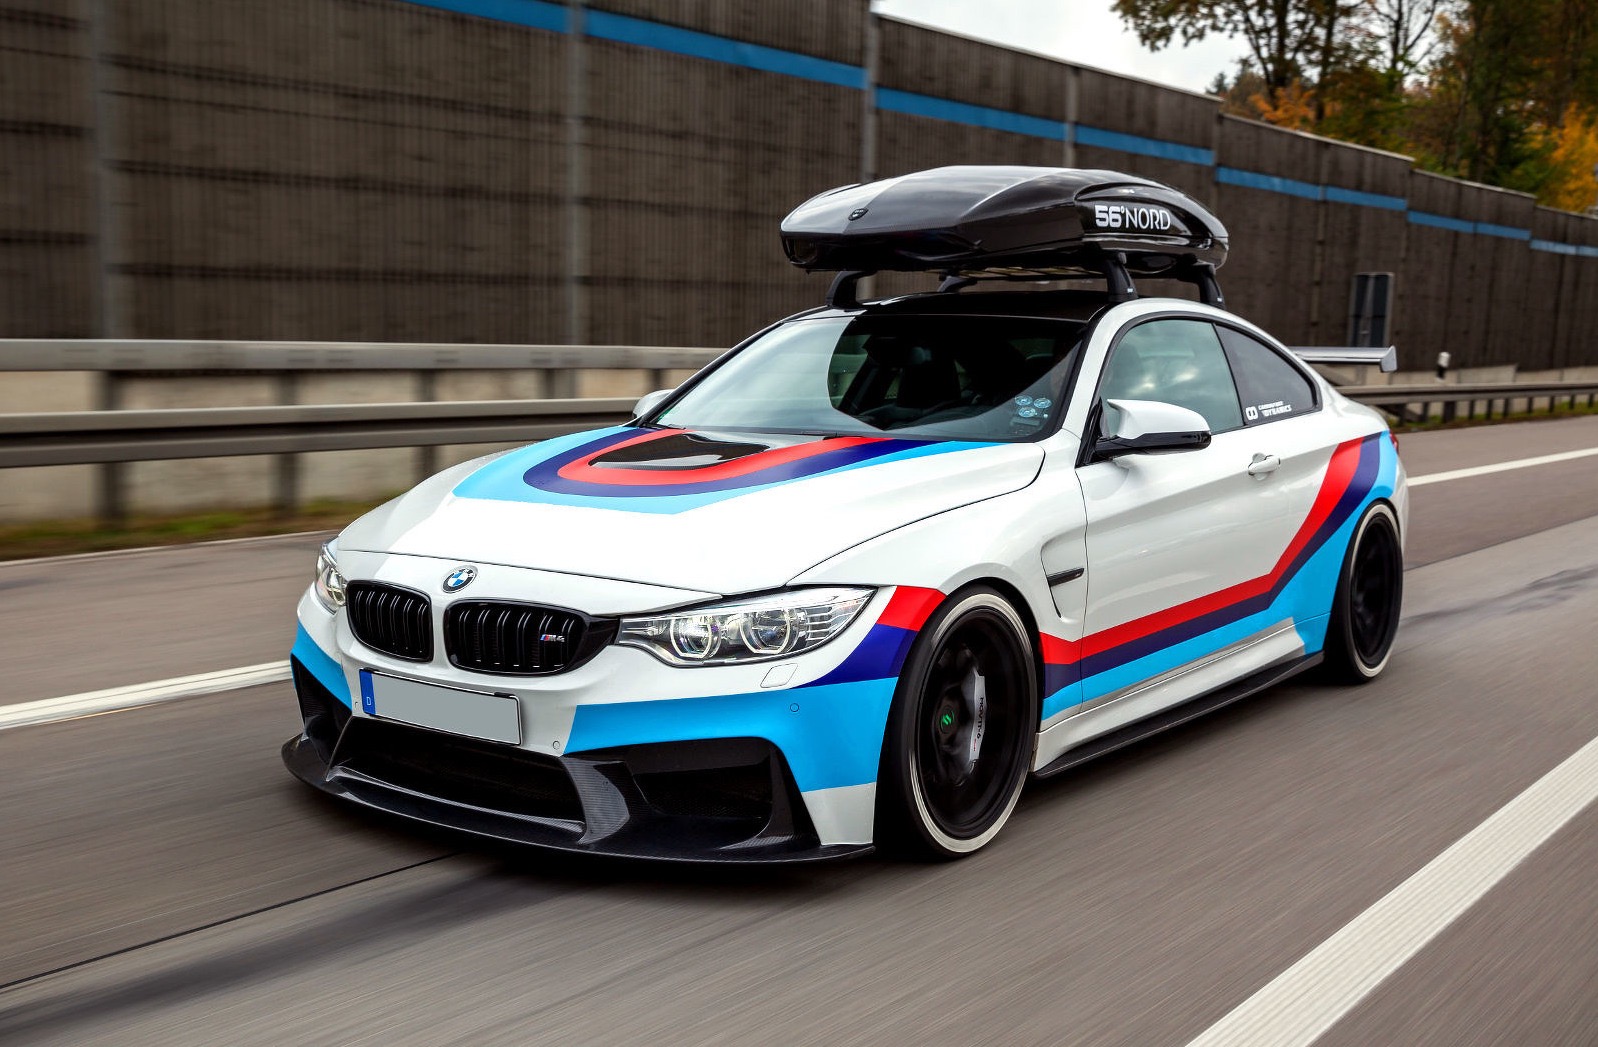 Carbonfibre Dynamics creates highly tuned BMW M4 ‘F82 M4R’